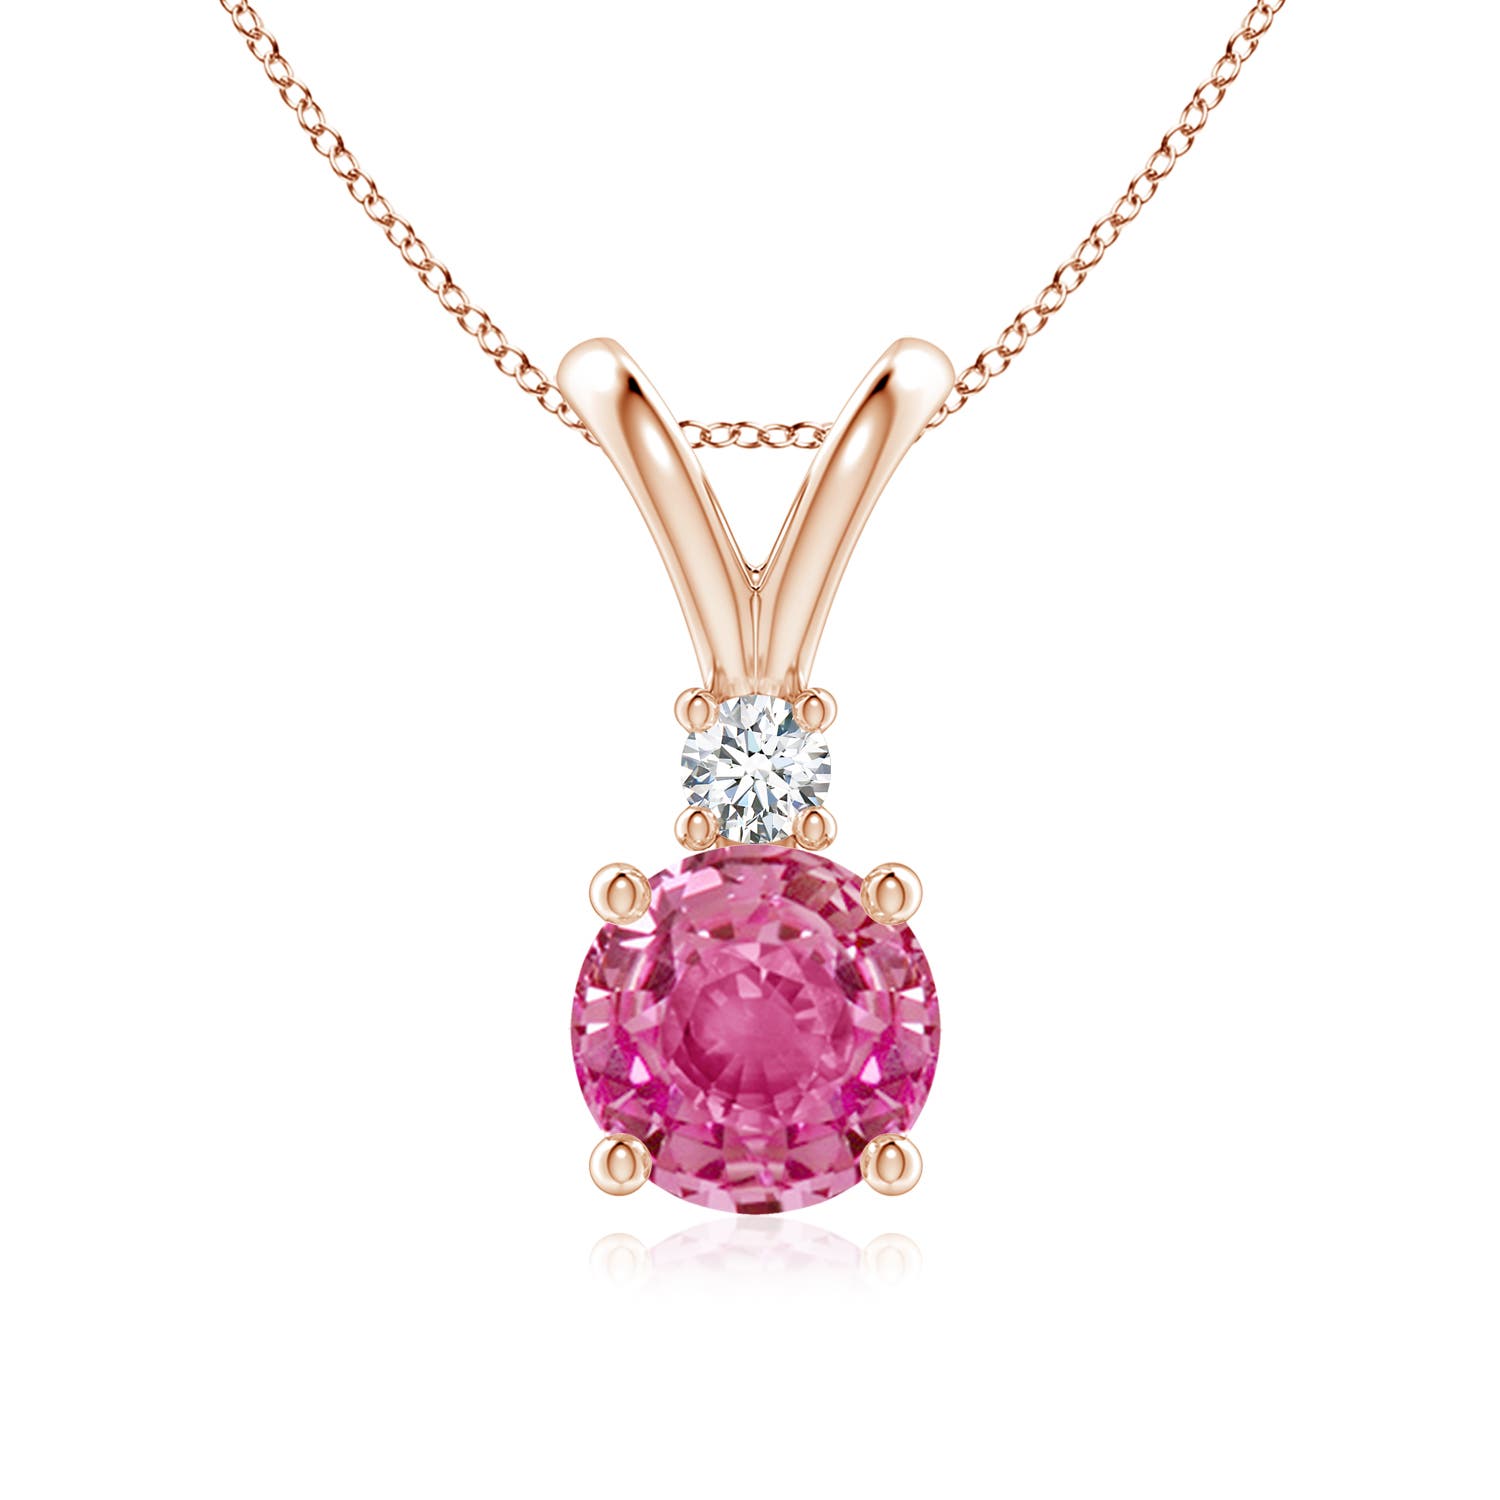 AAA - Pink Sapphire / 1.67 CT / 14 KT Rose Gold